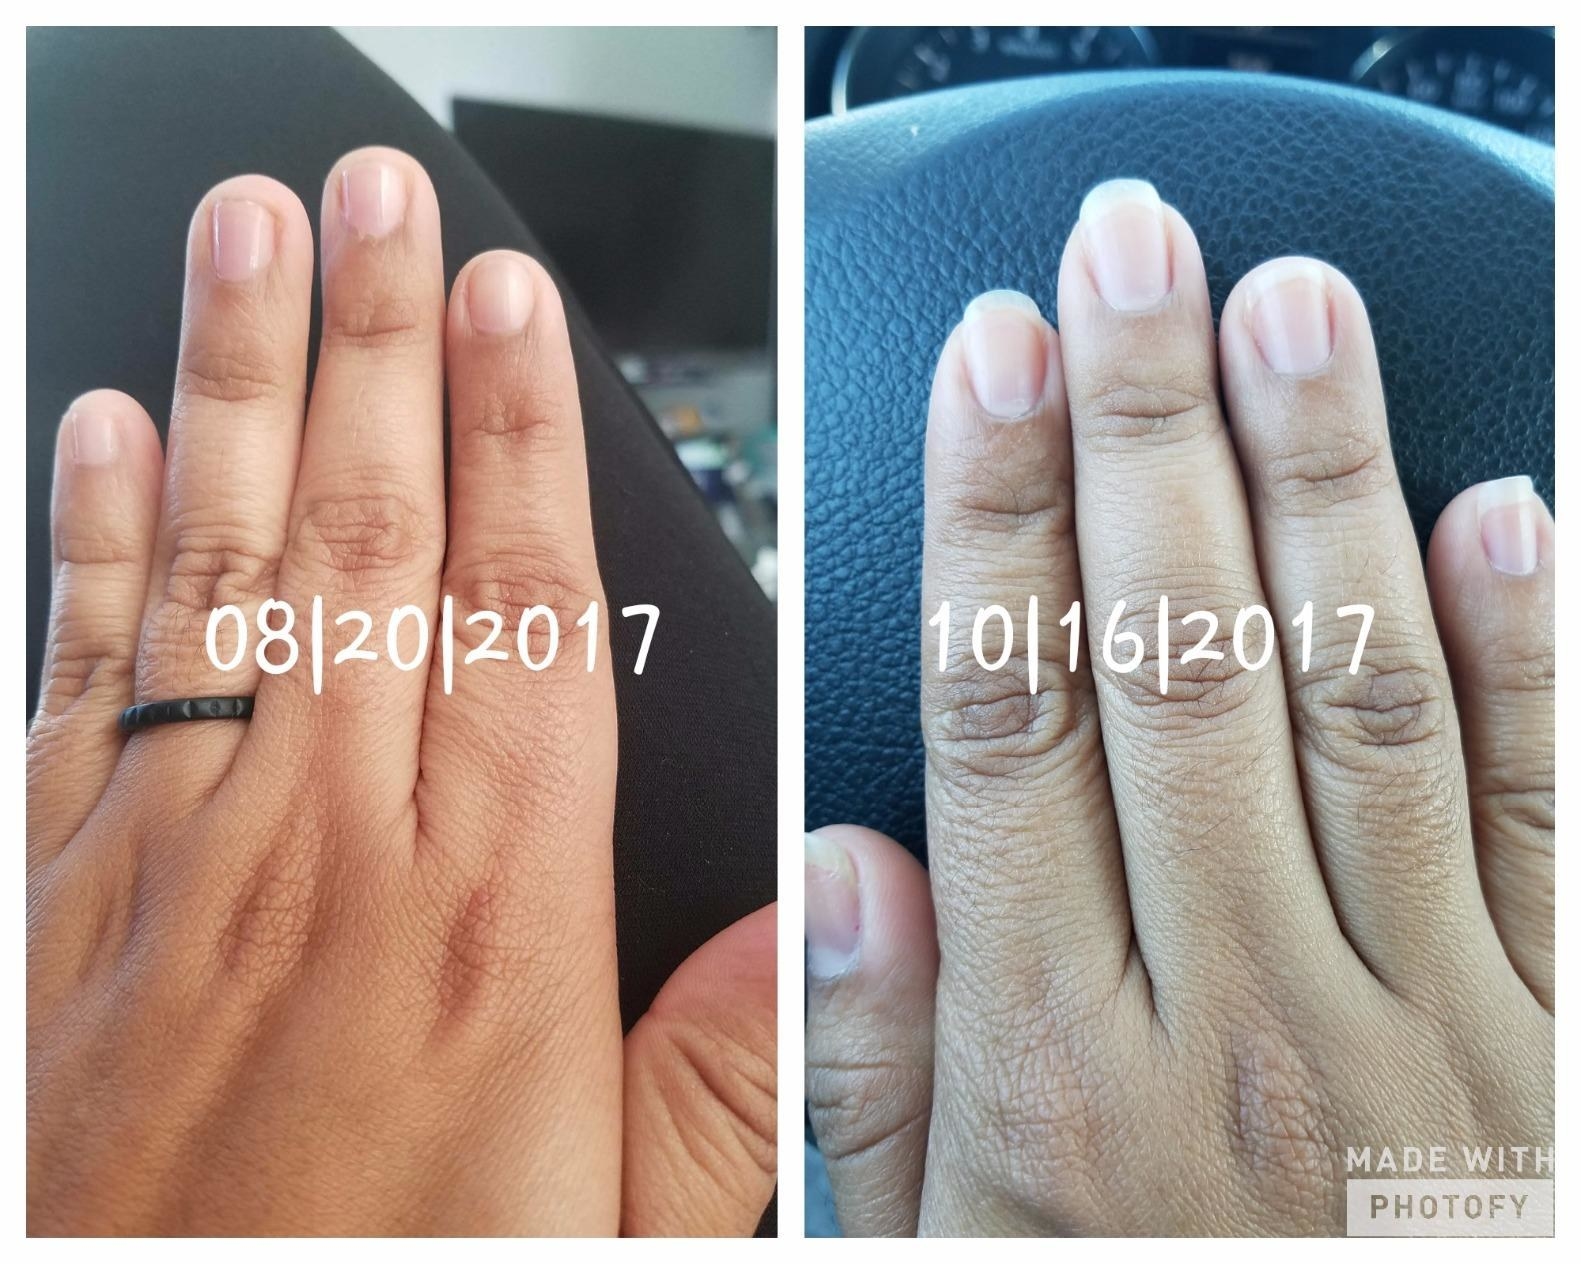 Left: A reviewer&#x27;s hand with bitten-down short nails on 8/20/2017; right: the same hand with slightly grown-out nails on 10/16/2017